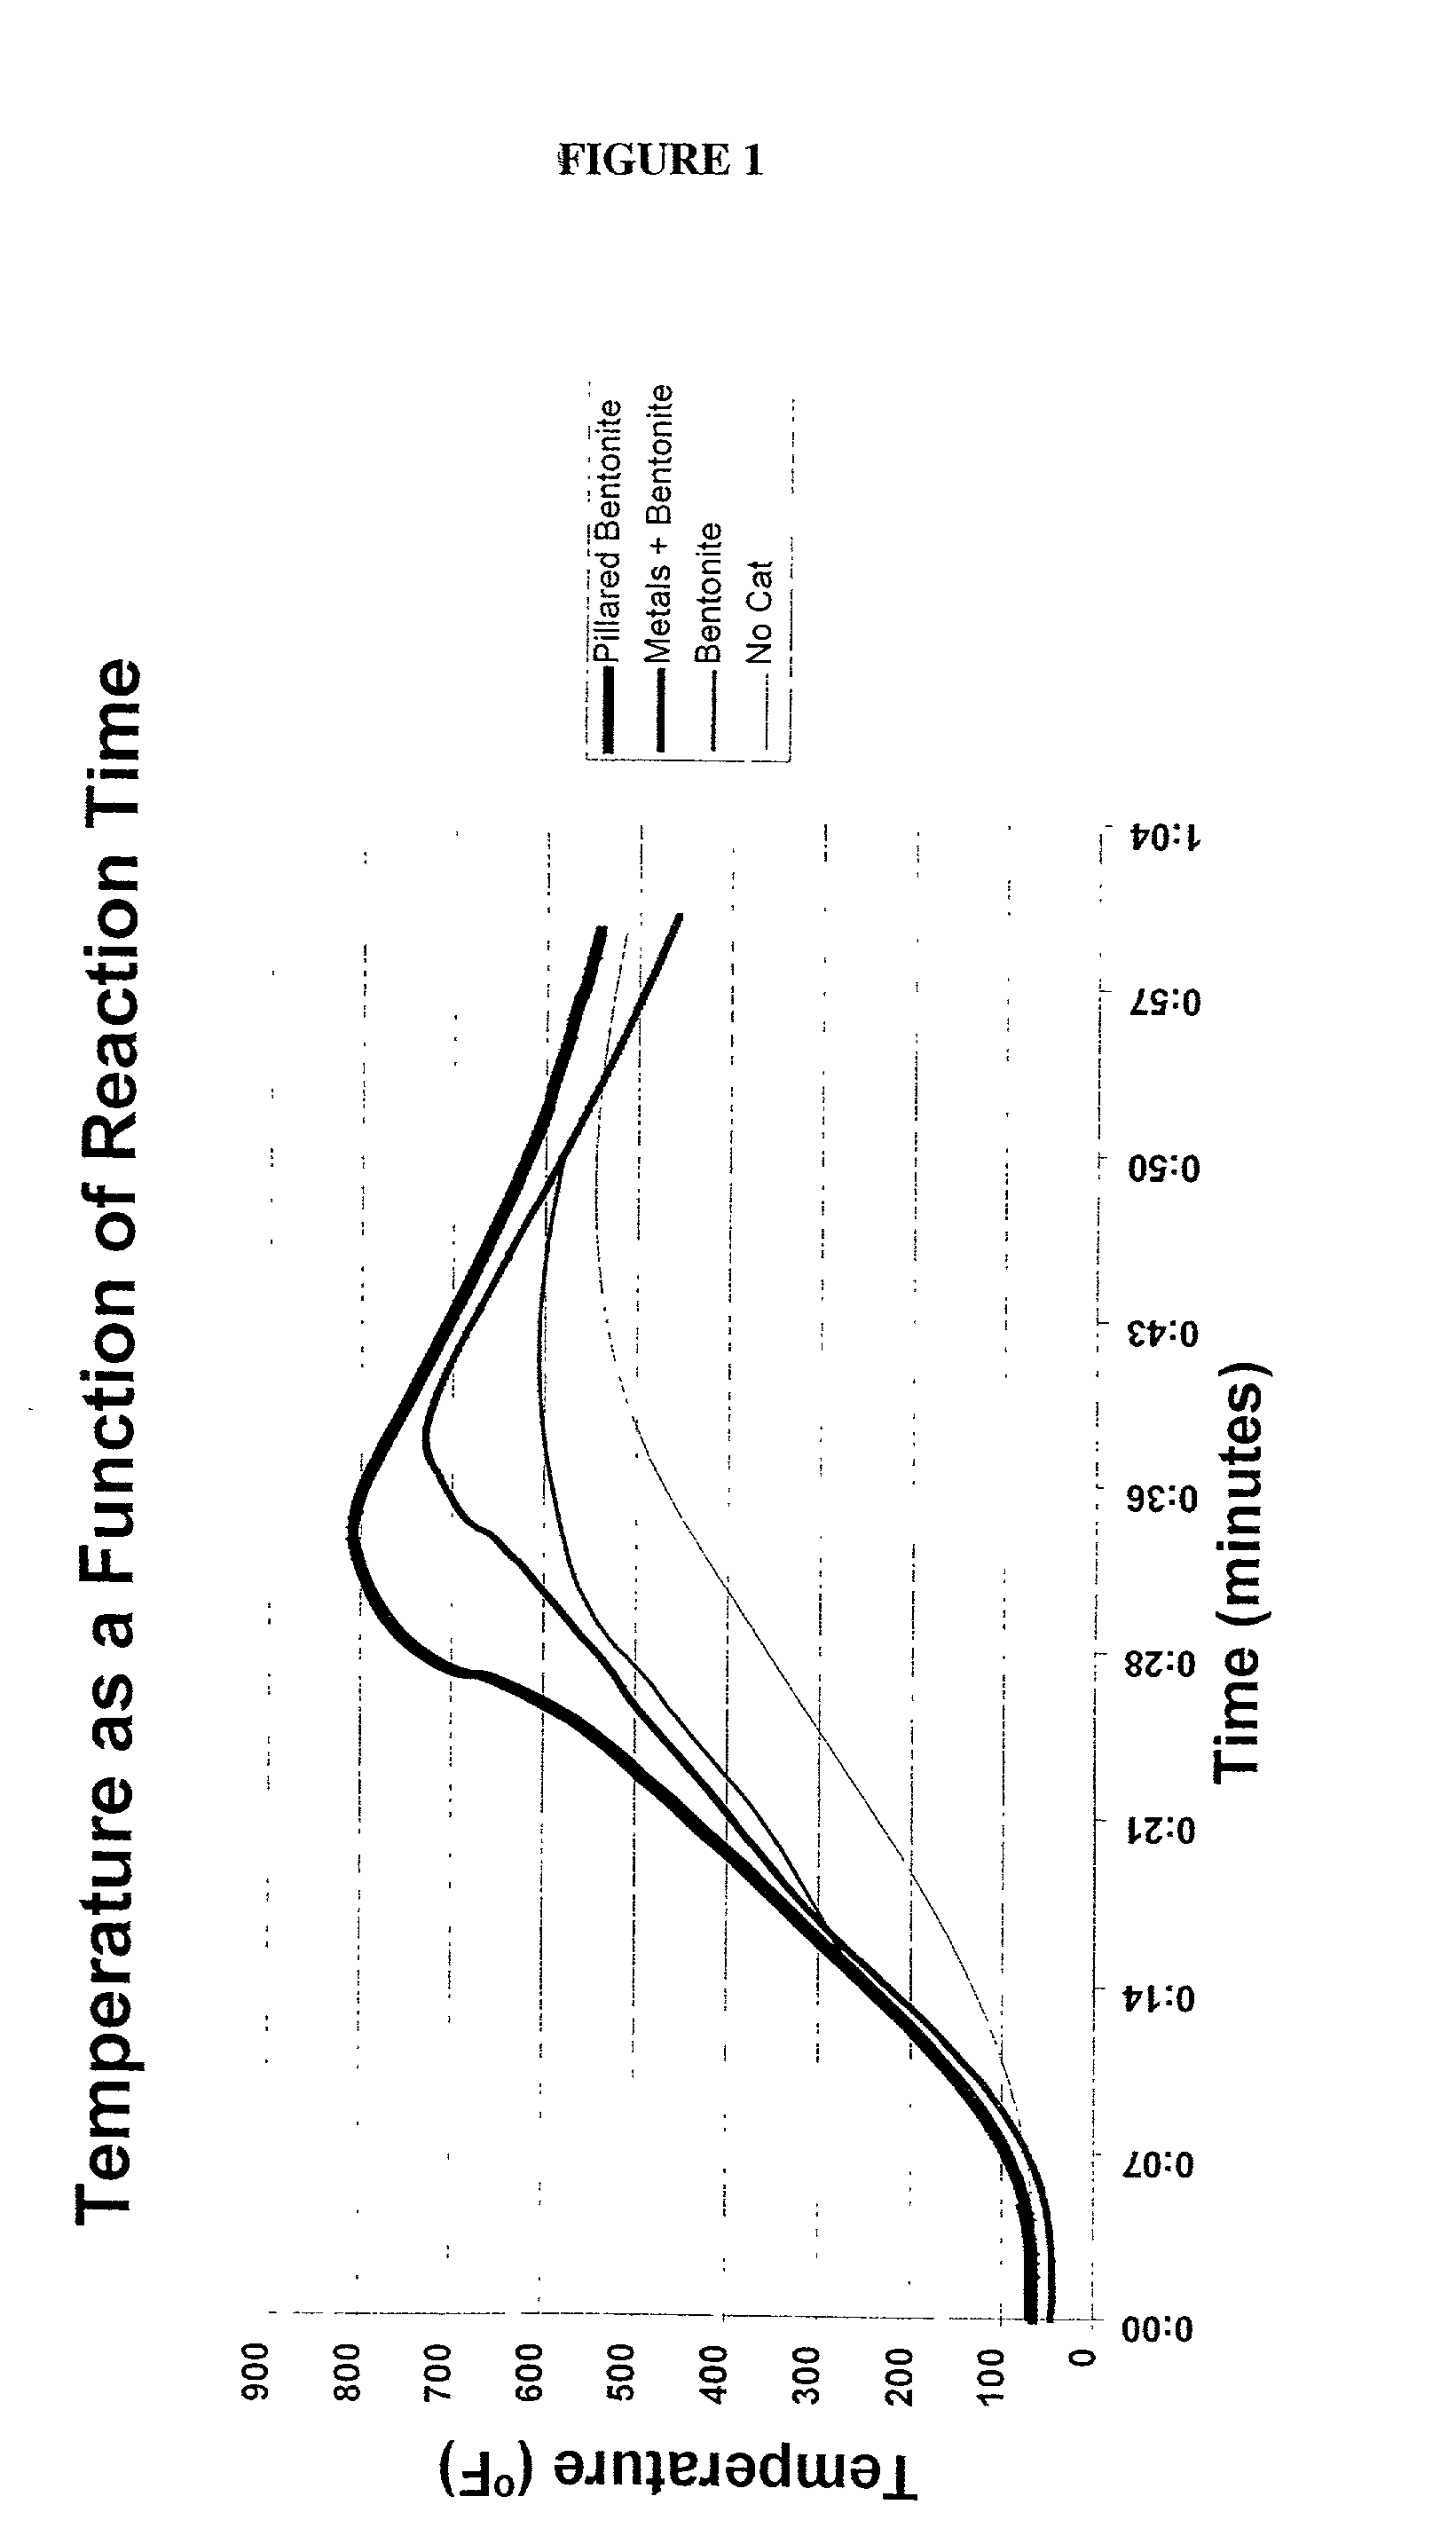 Low energy method of pyrolysis of hydrocarbon materials such as rubber